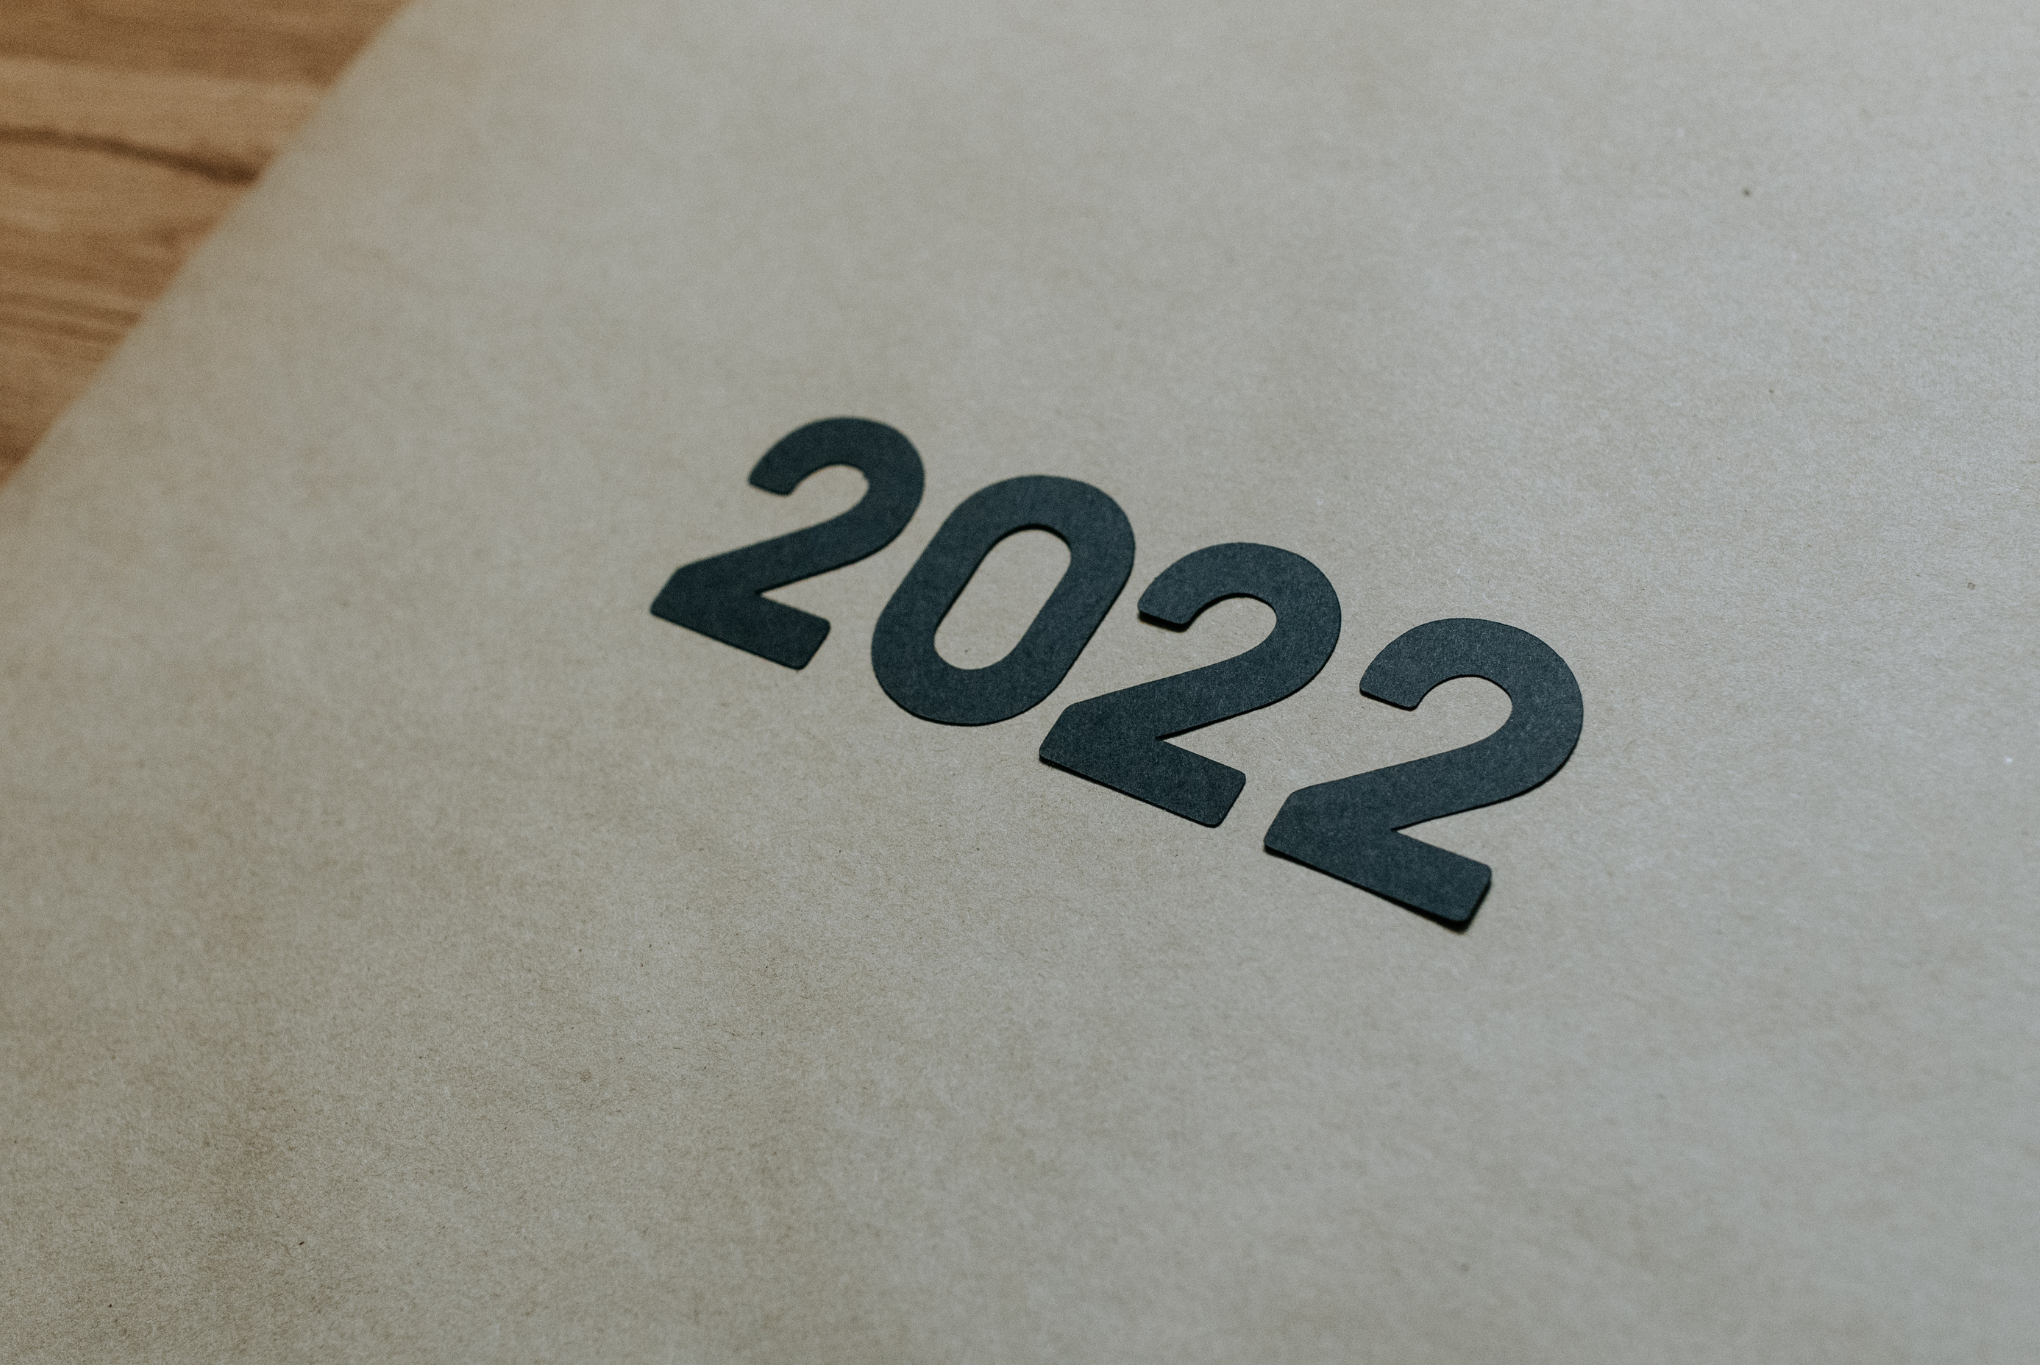 2022 ... the year things changed!